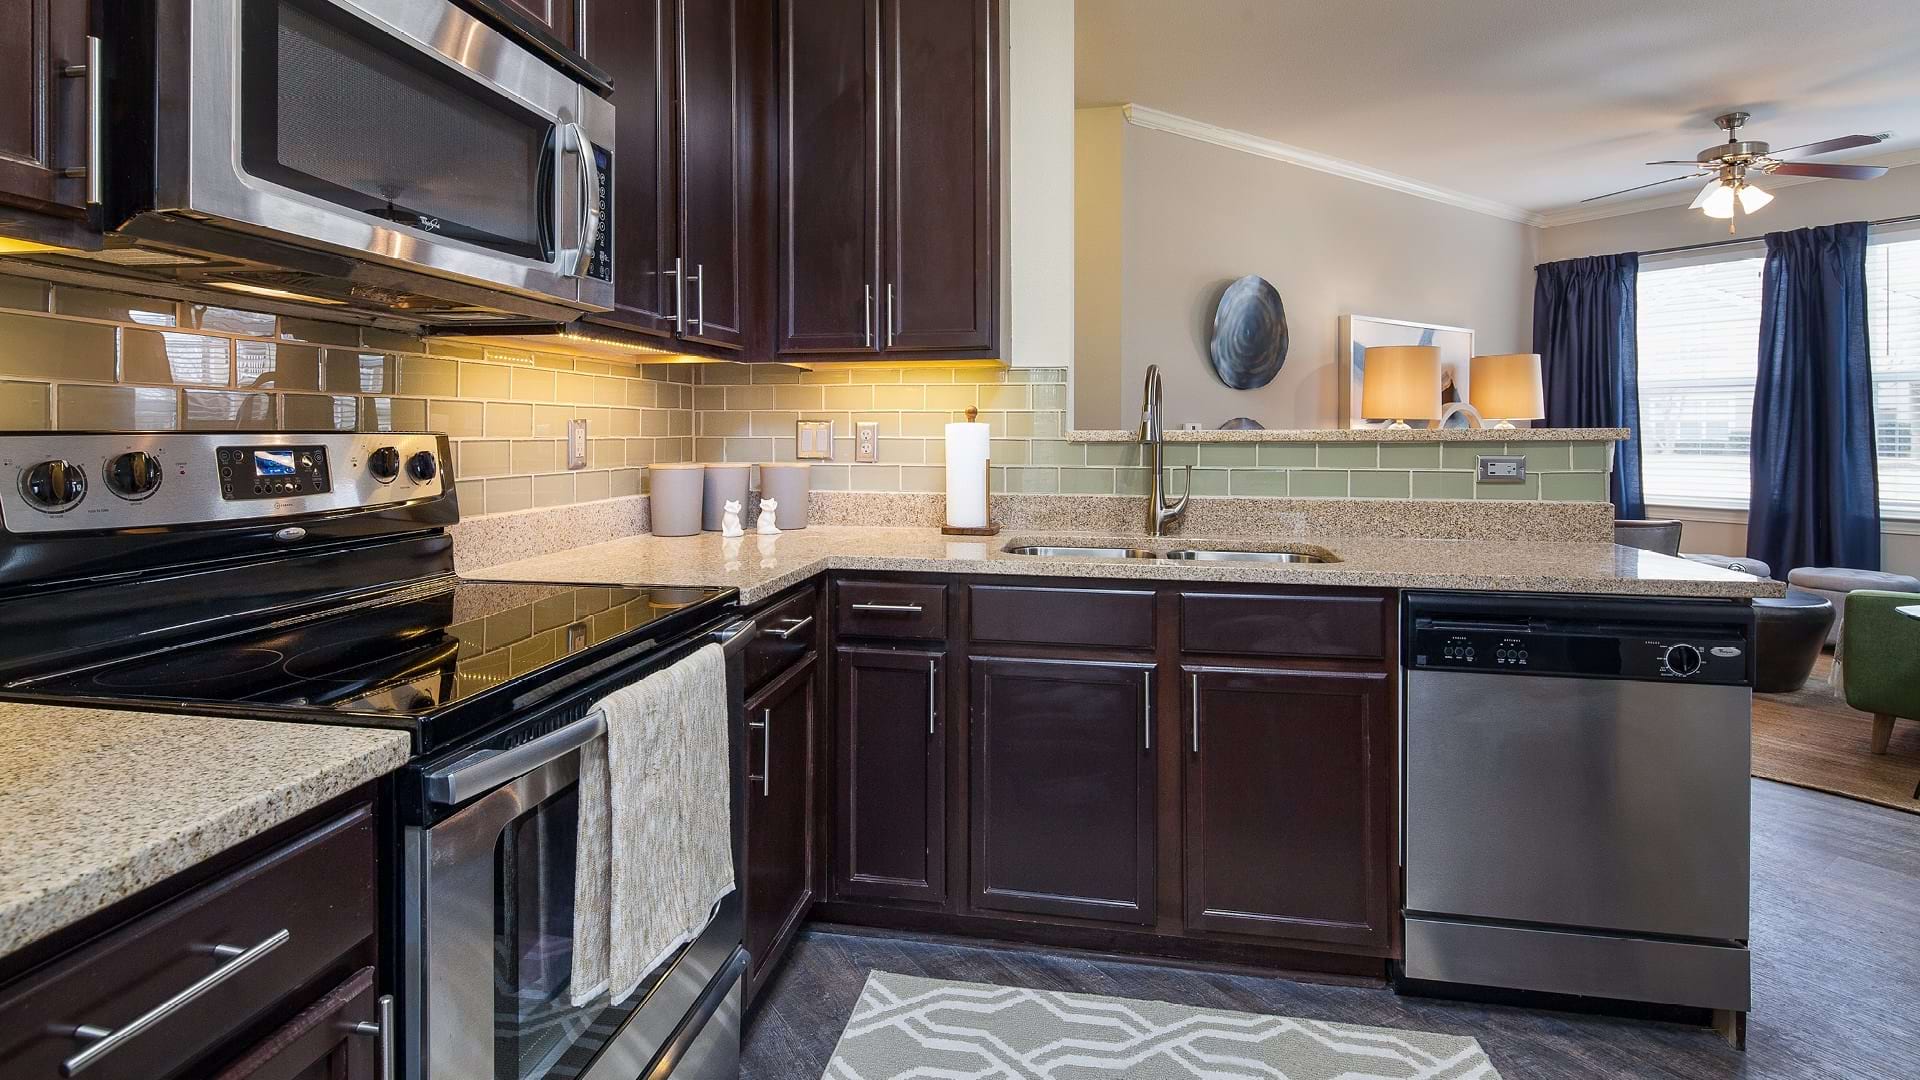 Modern Kitchen with Sleek Granite Countertops and Stainless Steel Appliances at Our University Area Apartments